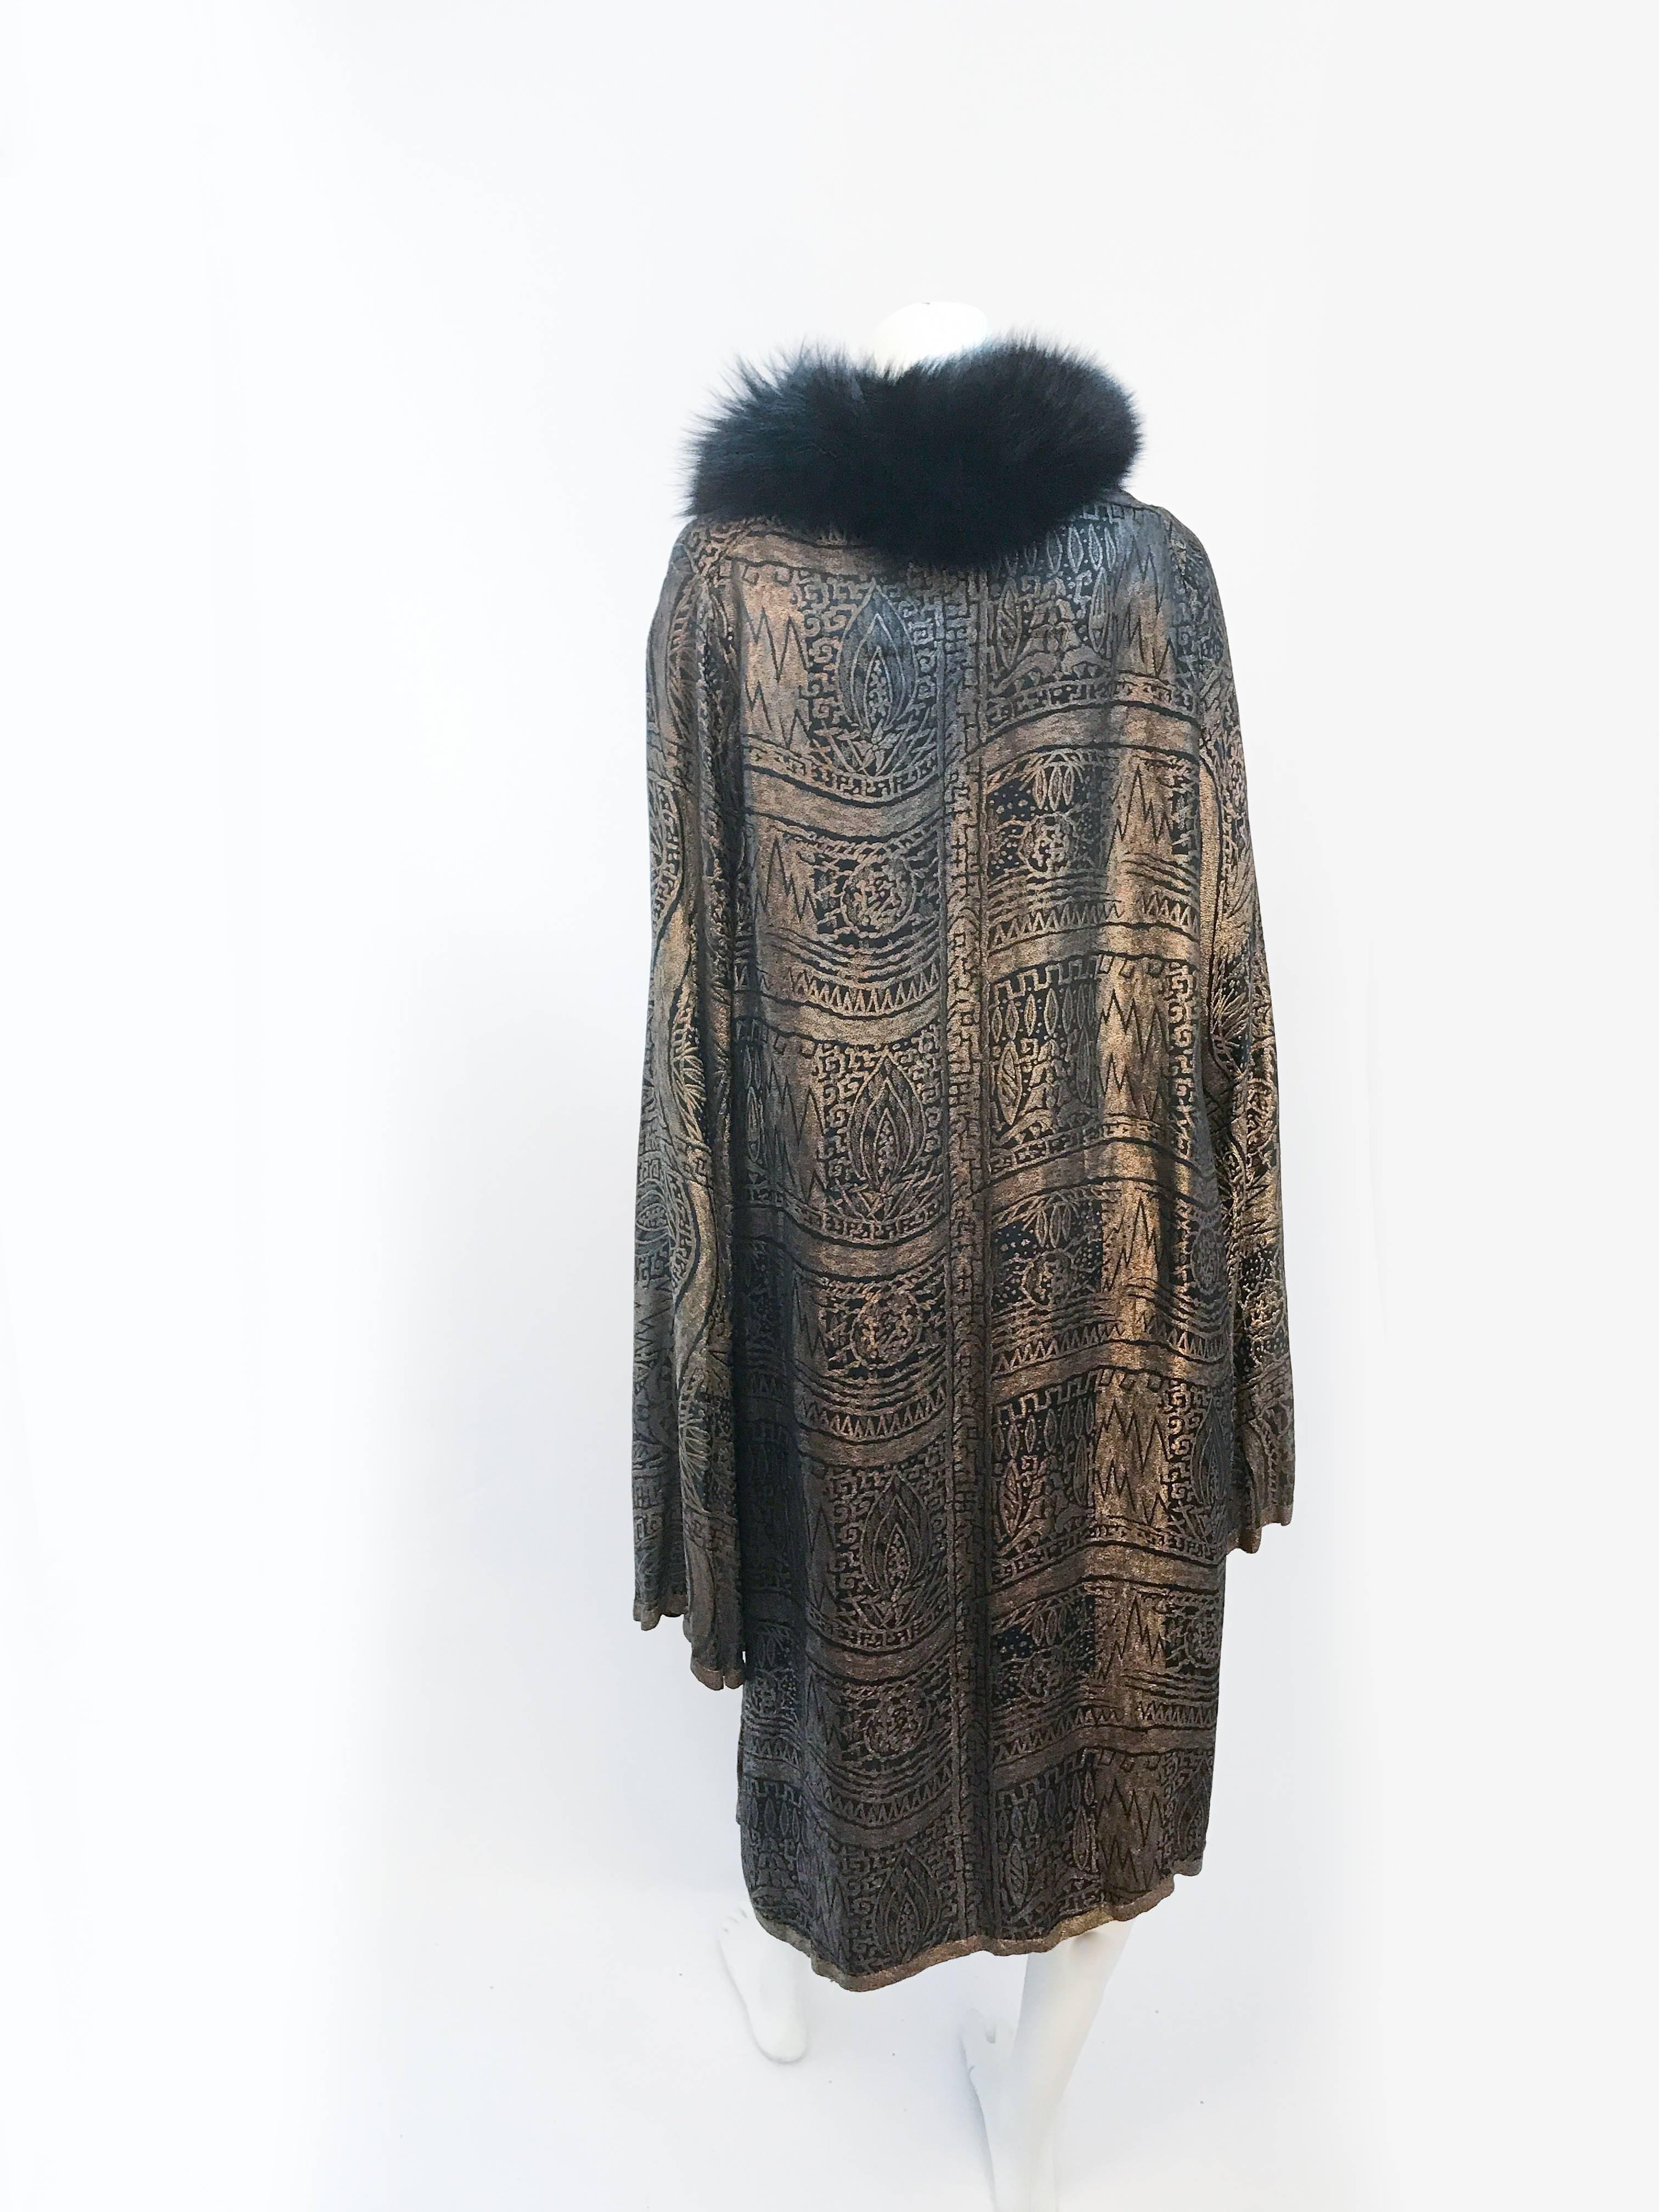 1920s Black Evening Evening Coat with Gold Lamé. Black evening coat with gold lamé. Imperial brocade trimmed in gold lamé. Black fox fur collar, trumpet sleeves (dramatic and extended), yoke lined in black silk. Made during novelty Egyptian Revival.